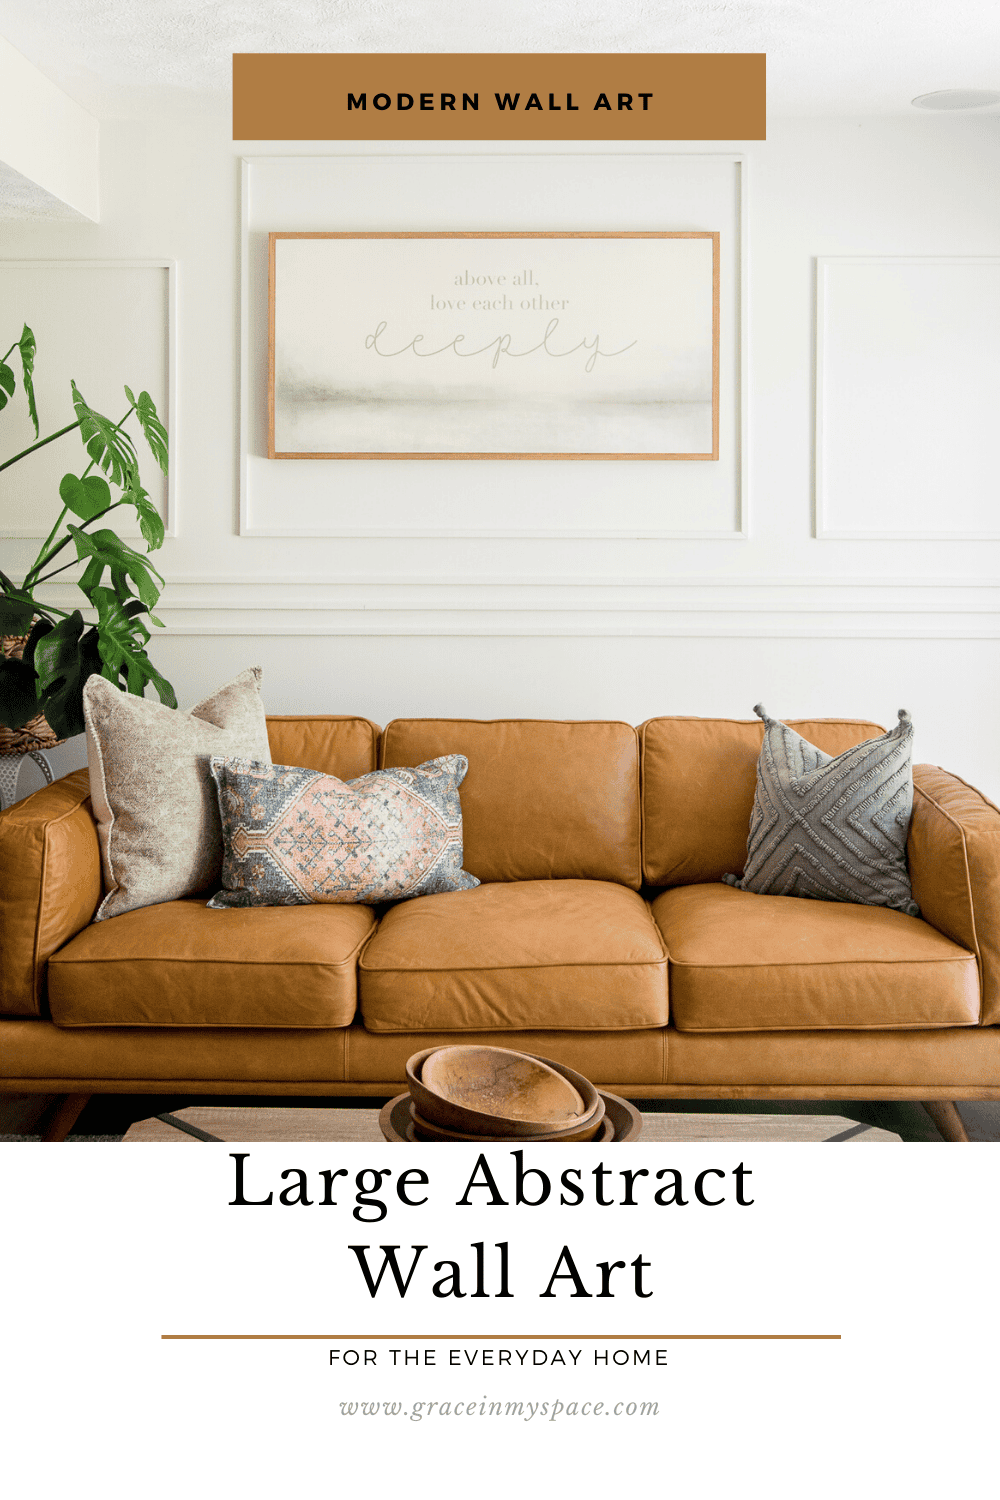 Large Abstract Wall Art for the Everyday Home